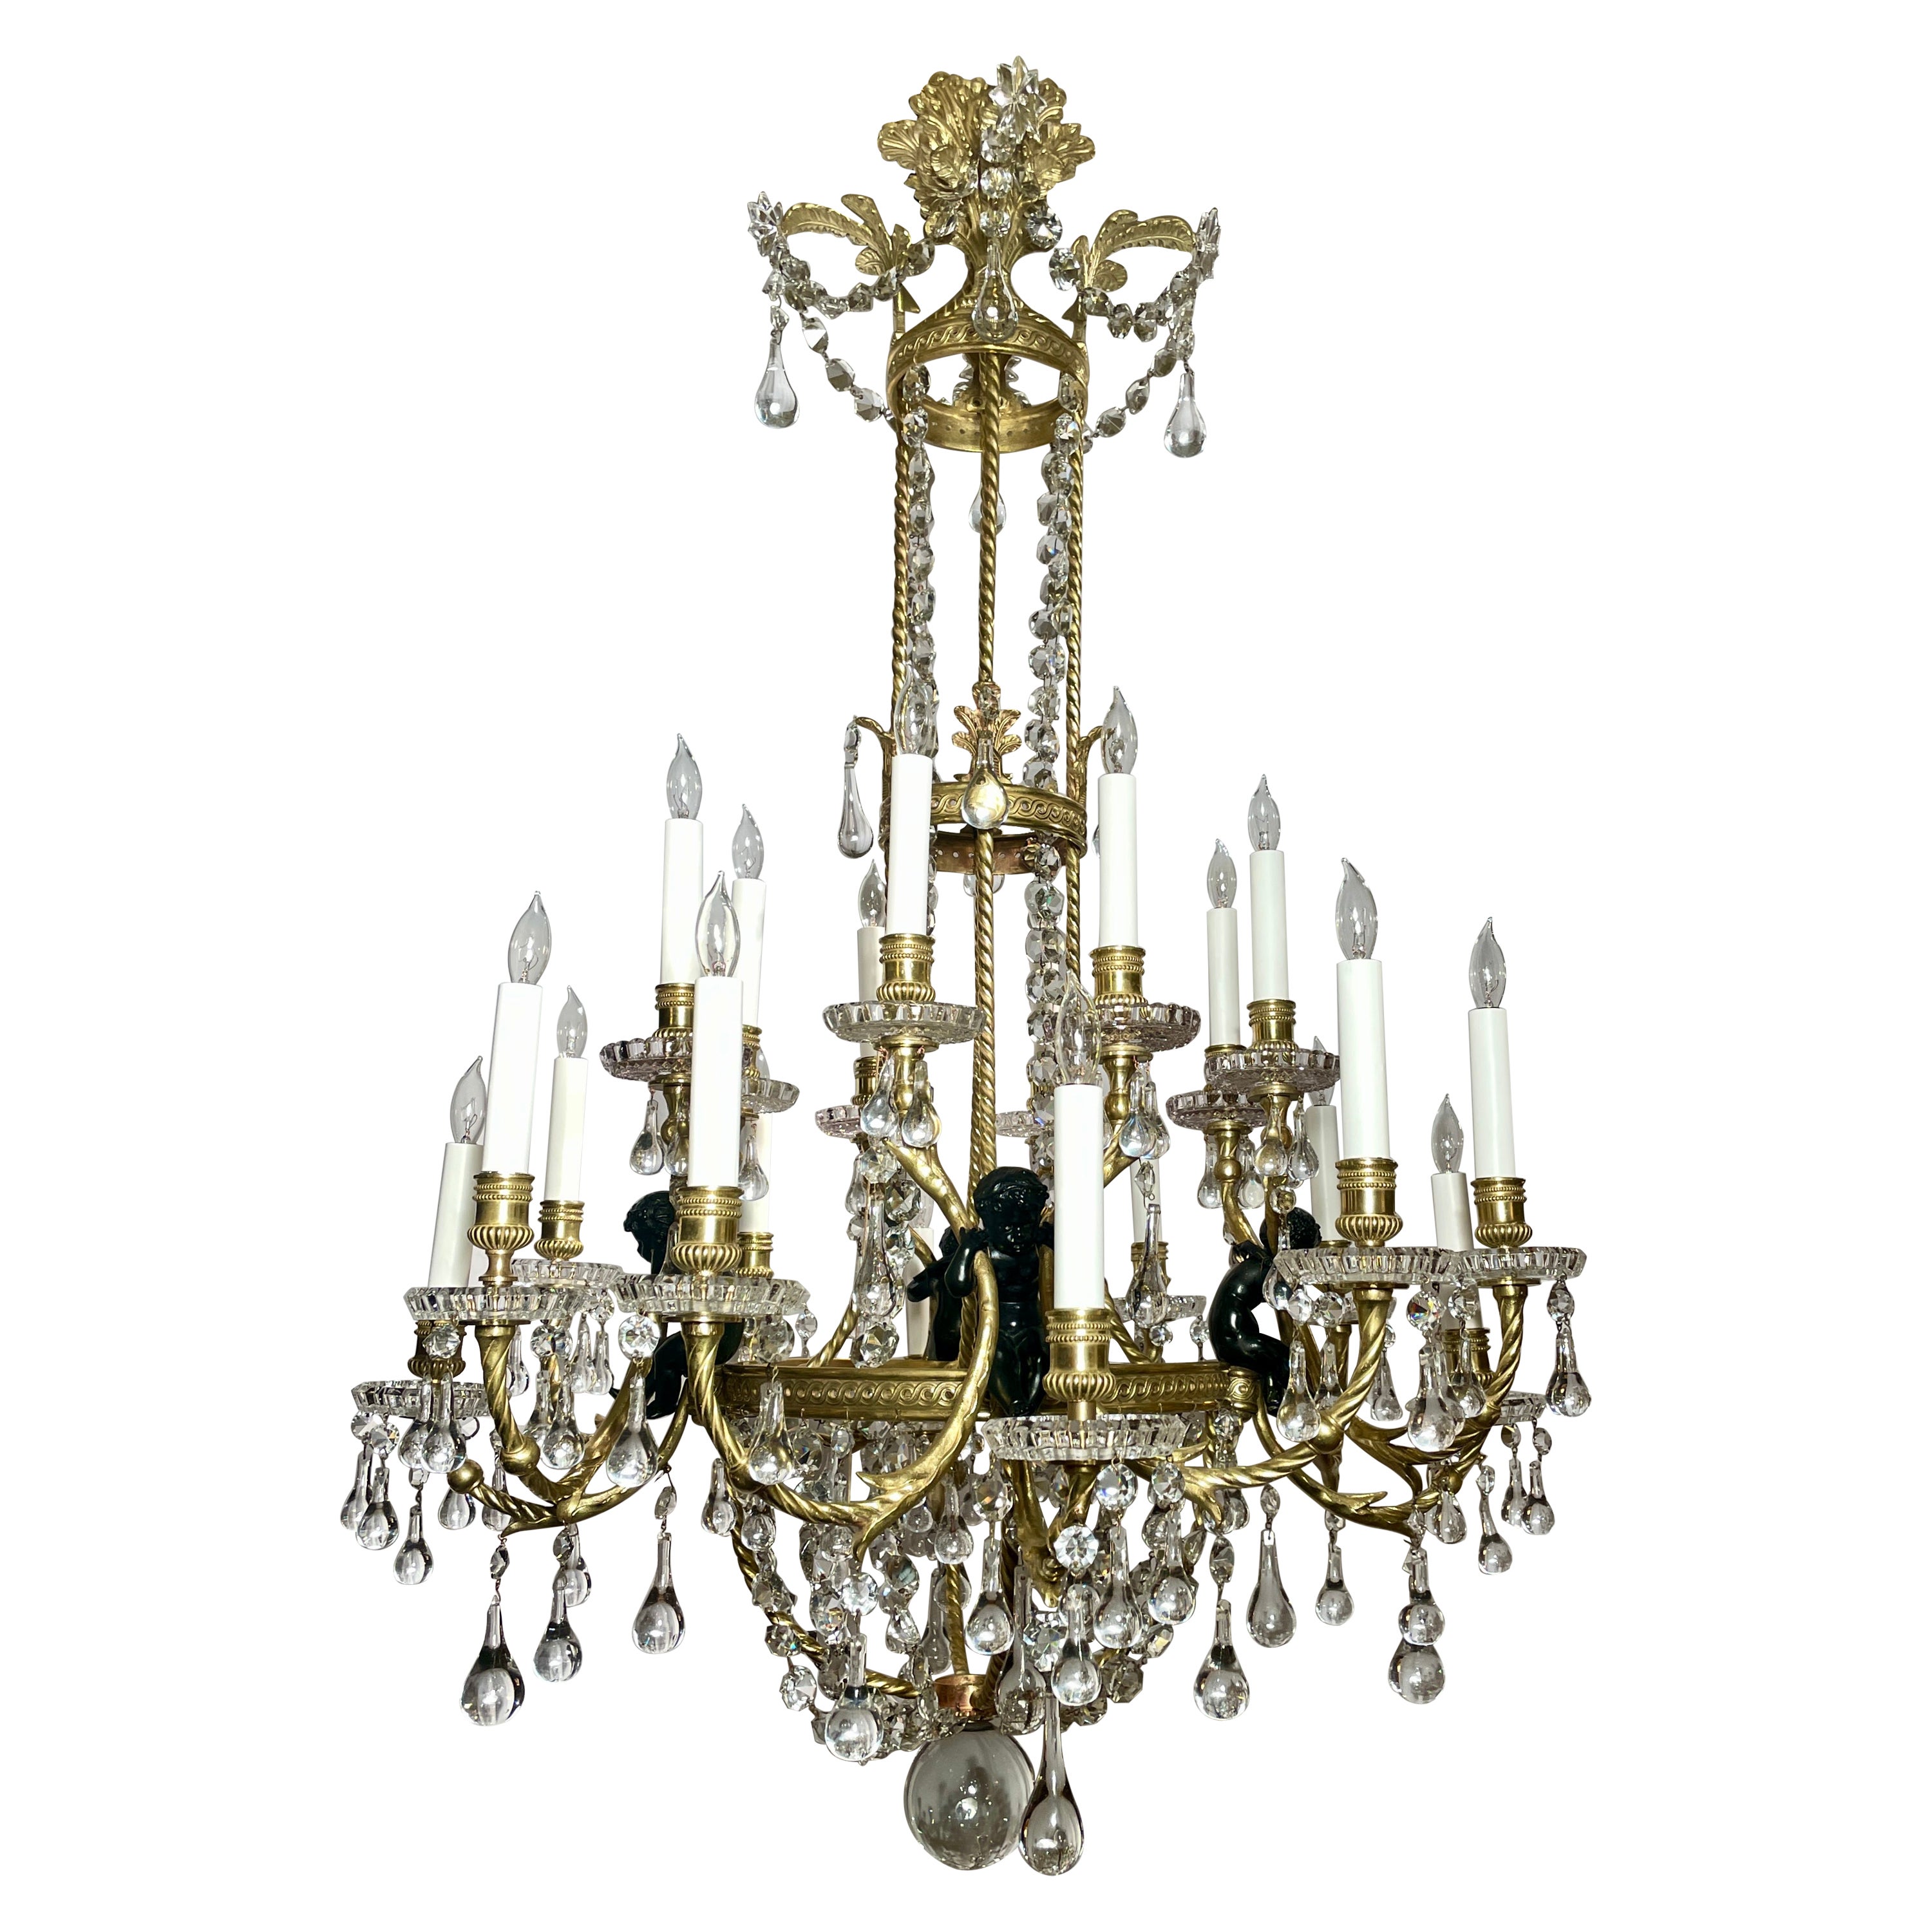 Antique French Baccarat Crystal & Bronze D'ore Chandelier, circa 1890